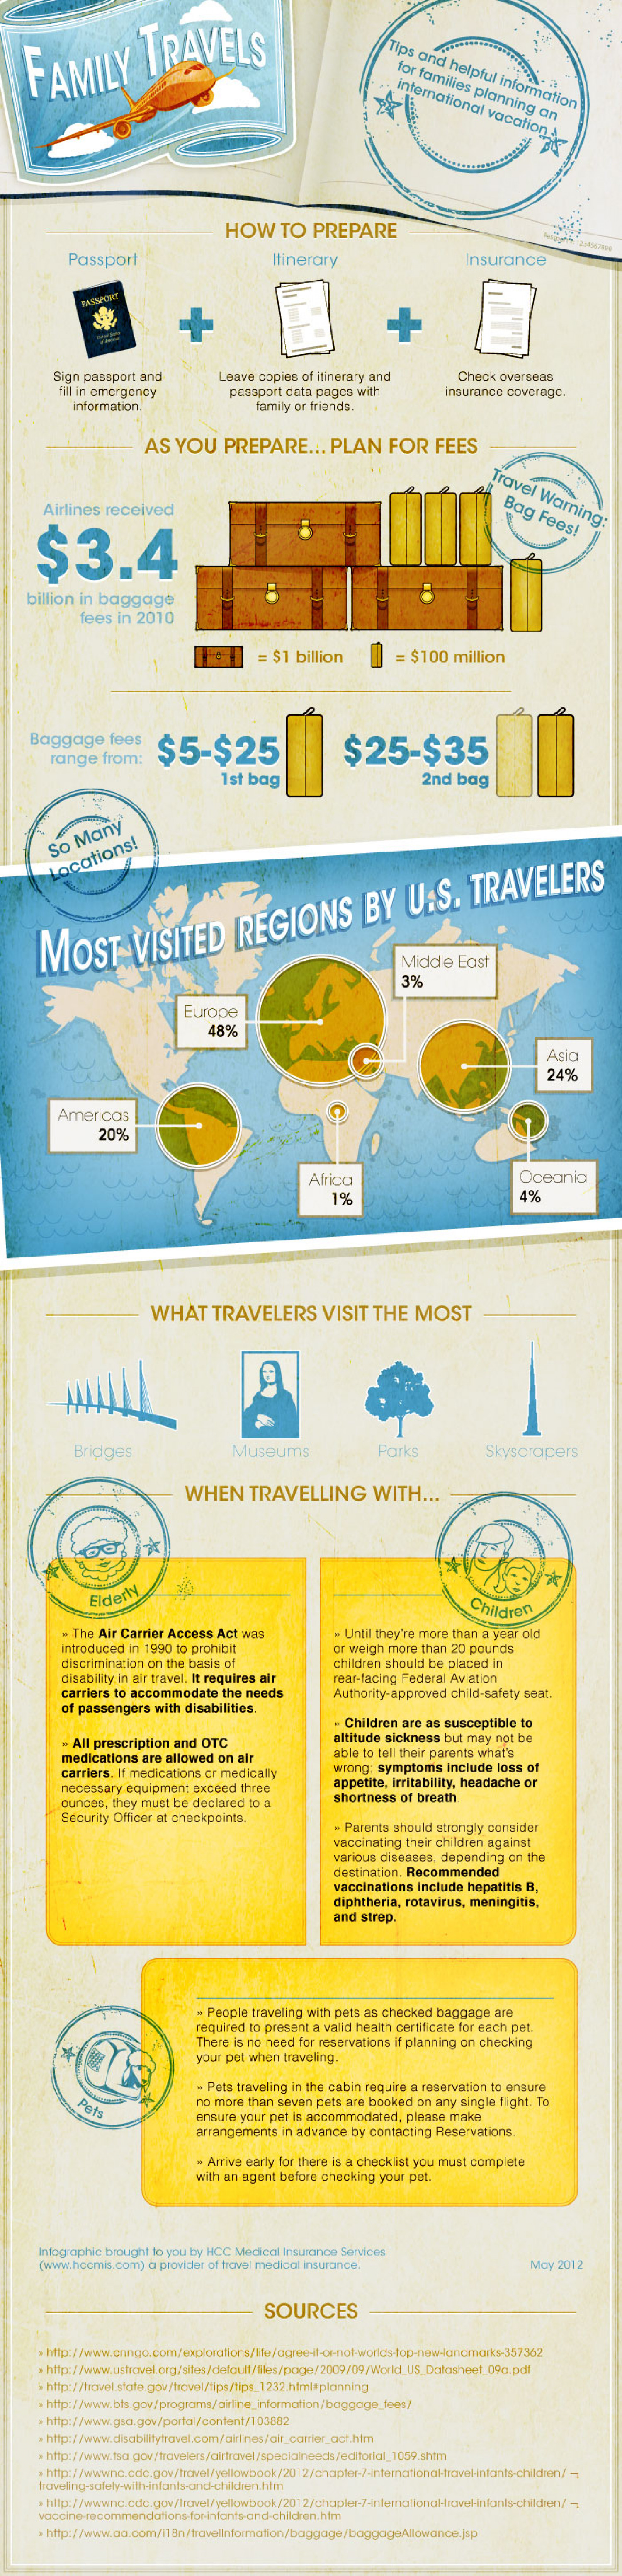 Family Travels Infographic